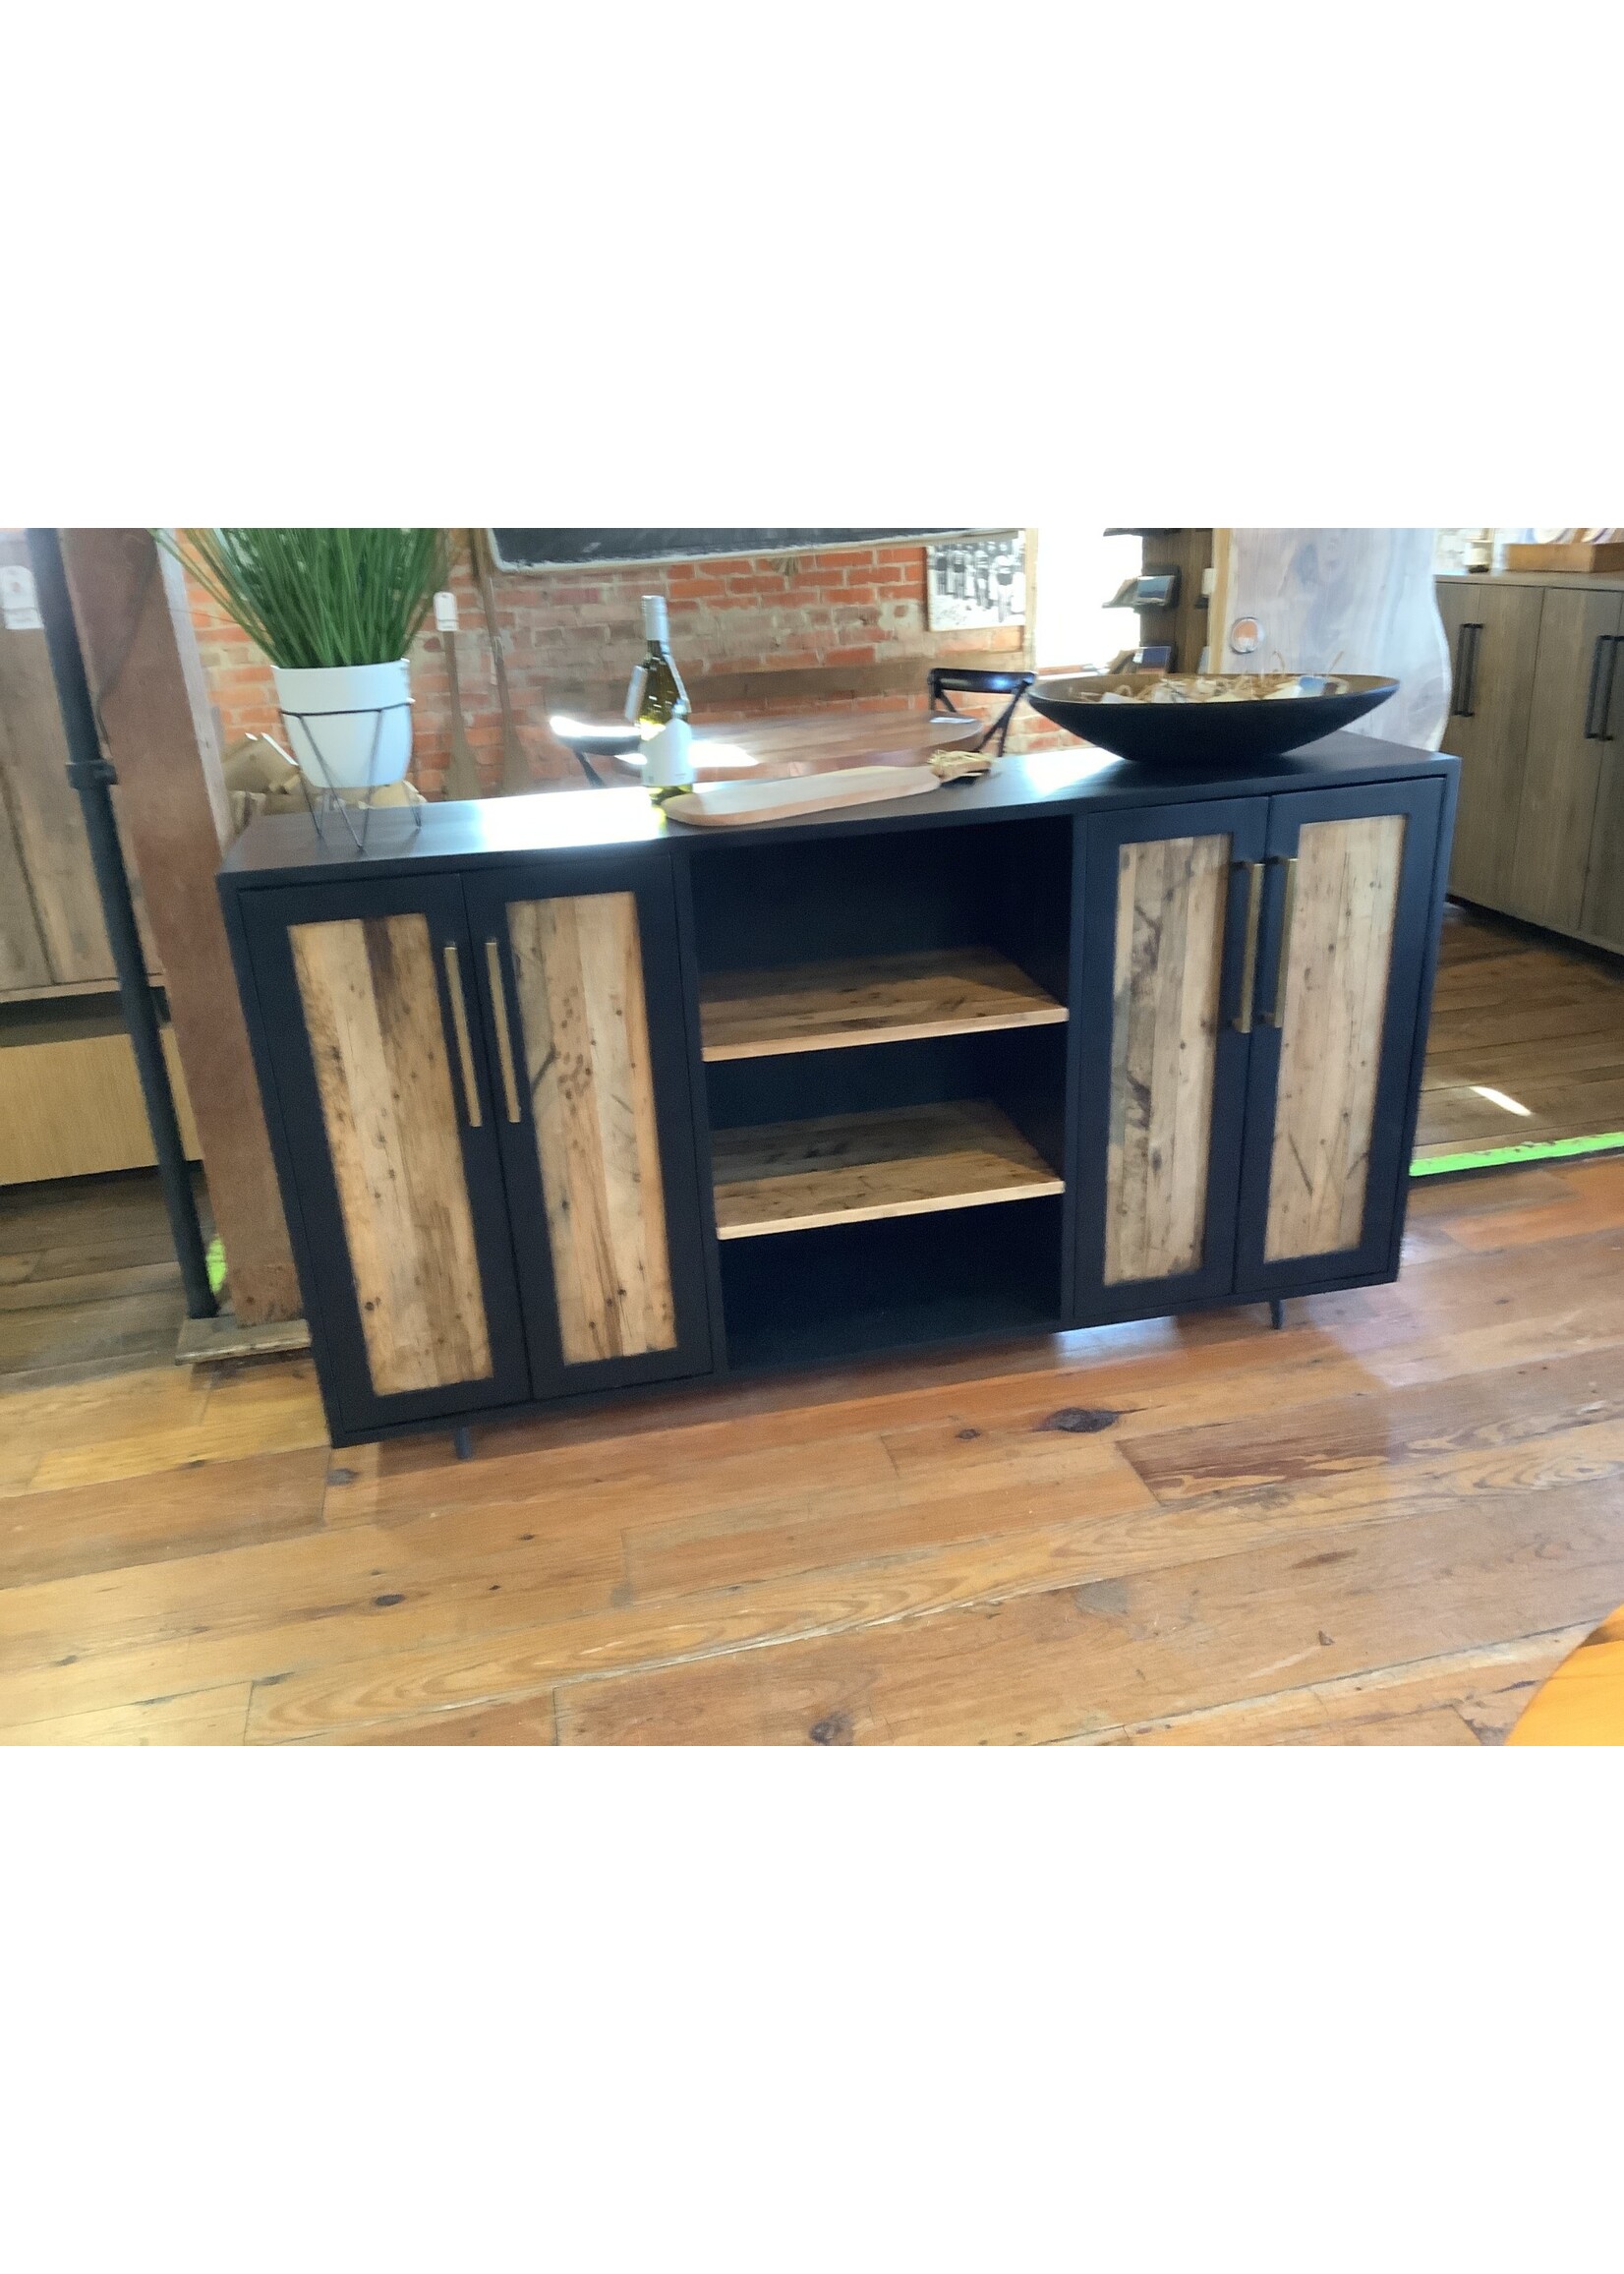 Old Wood Delaware OW EveryHome WPOF 4 Dr 2 Shelf Cabinet Black w/ MFF Doors 72"Lx16"Dx40"H